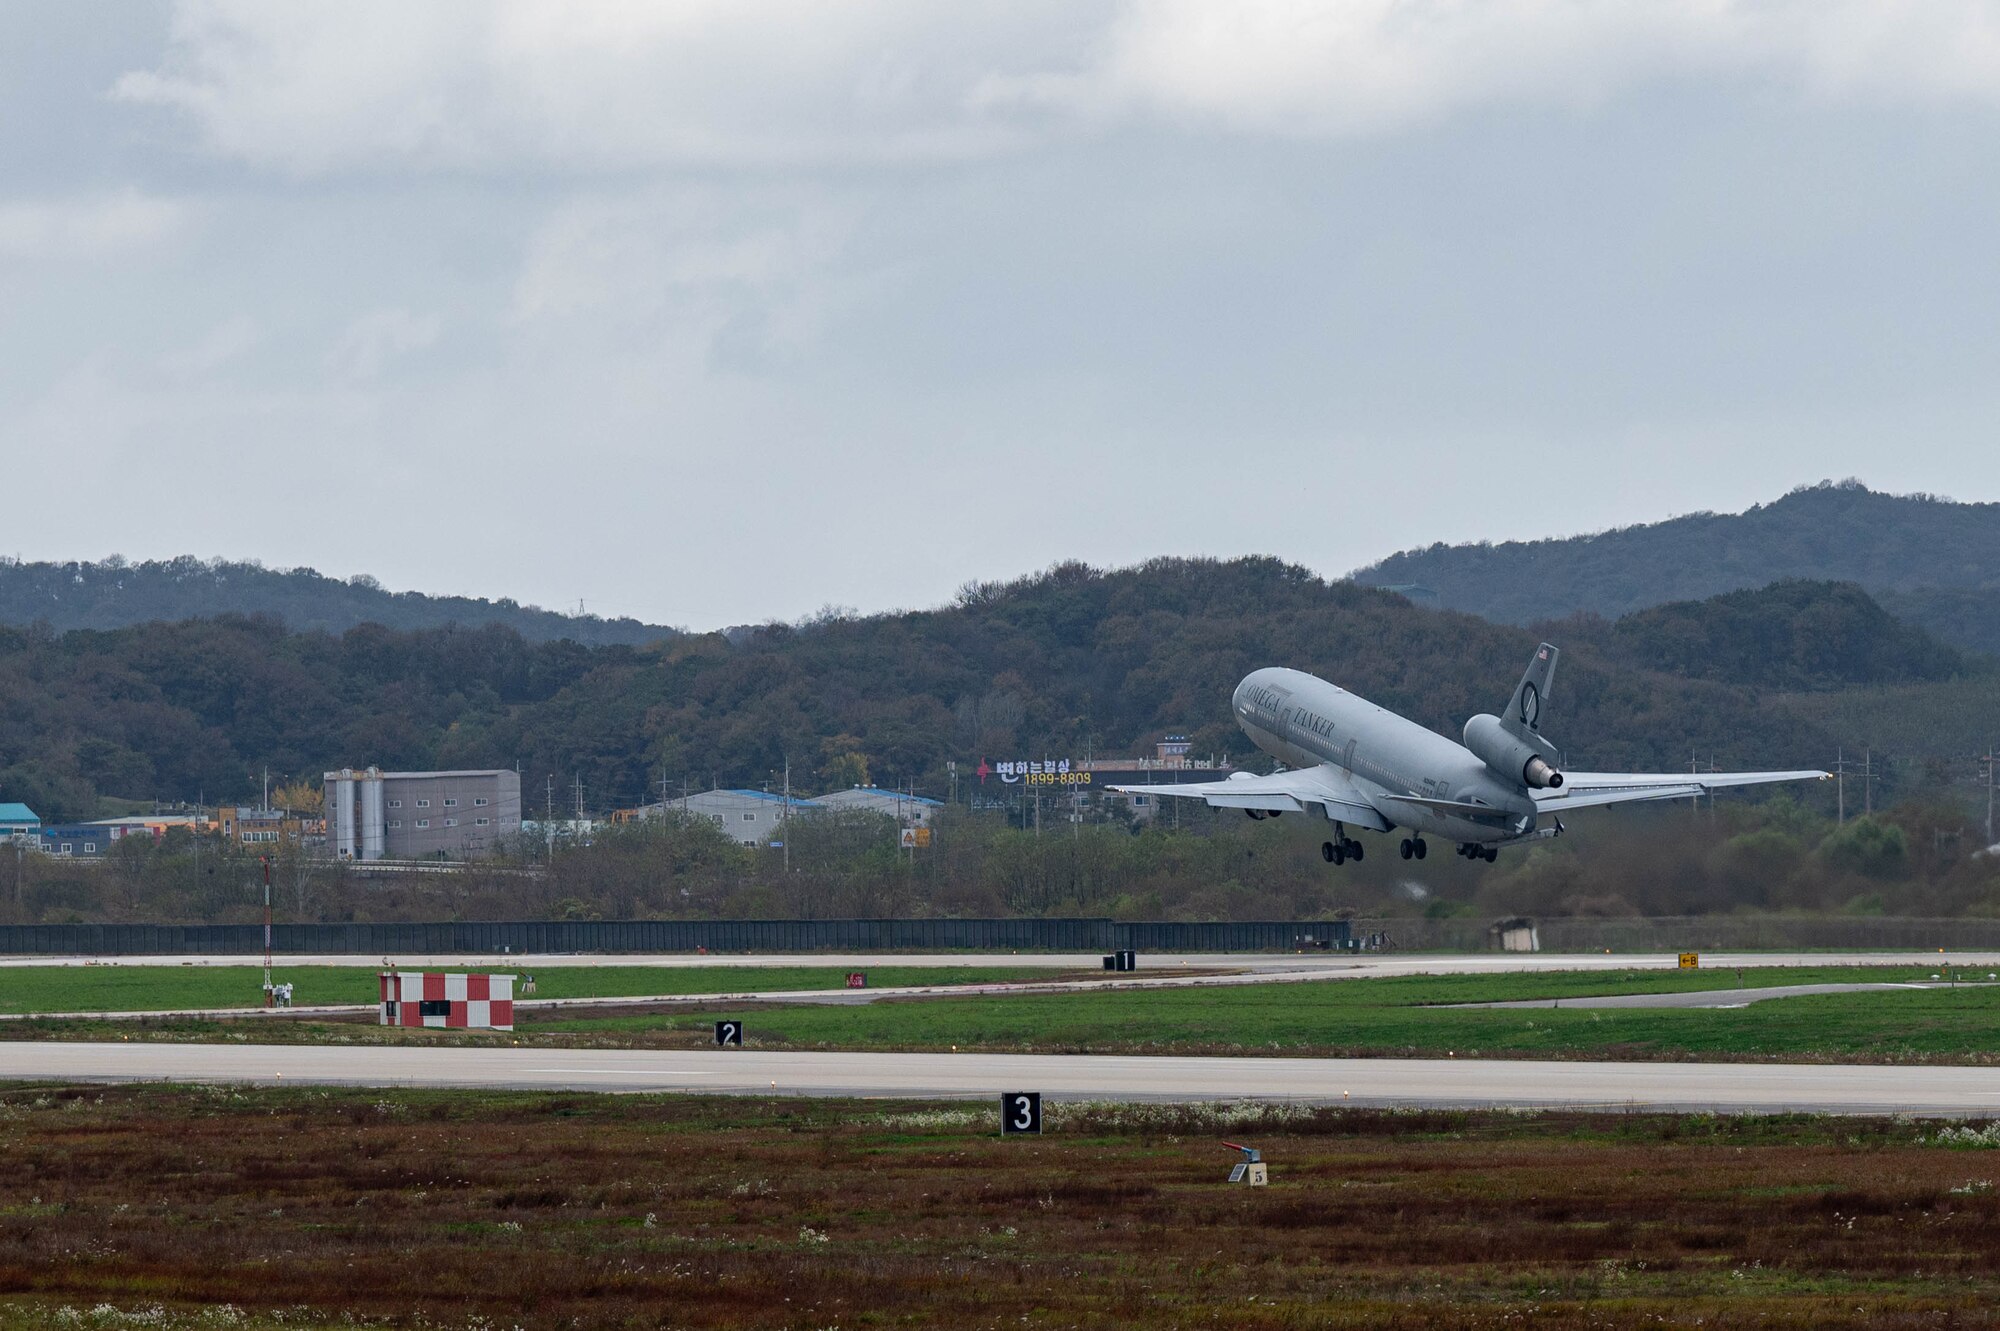 Photo of a commercial KDC-10 Tanker aircraft taking-off